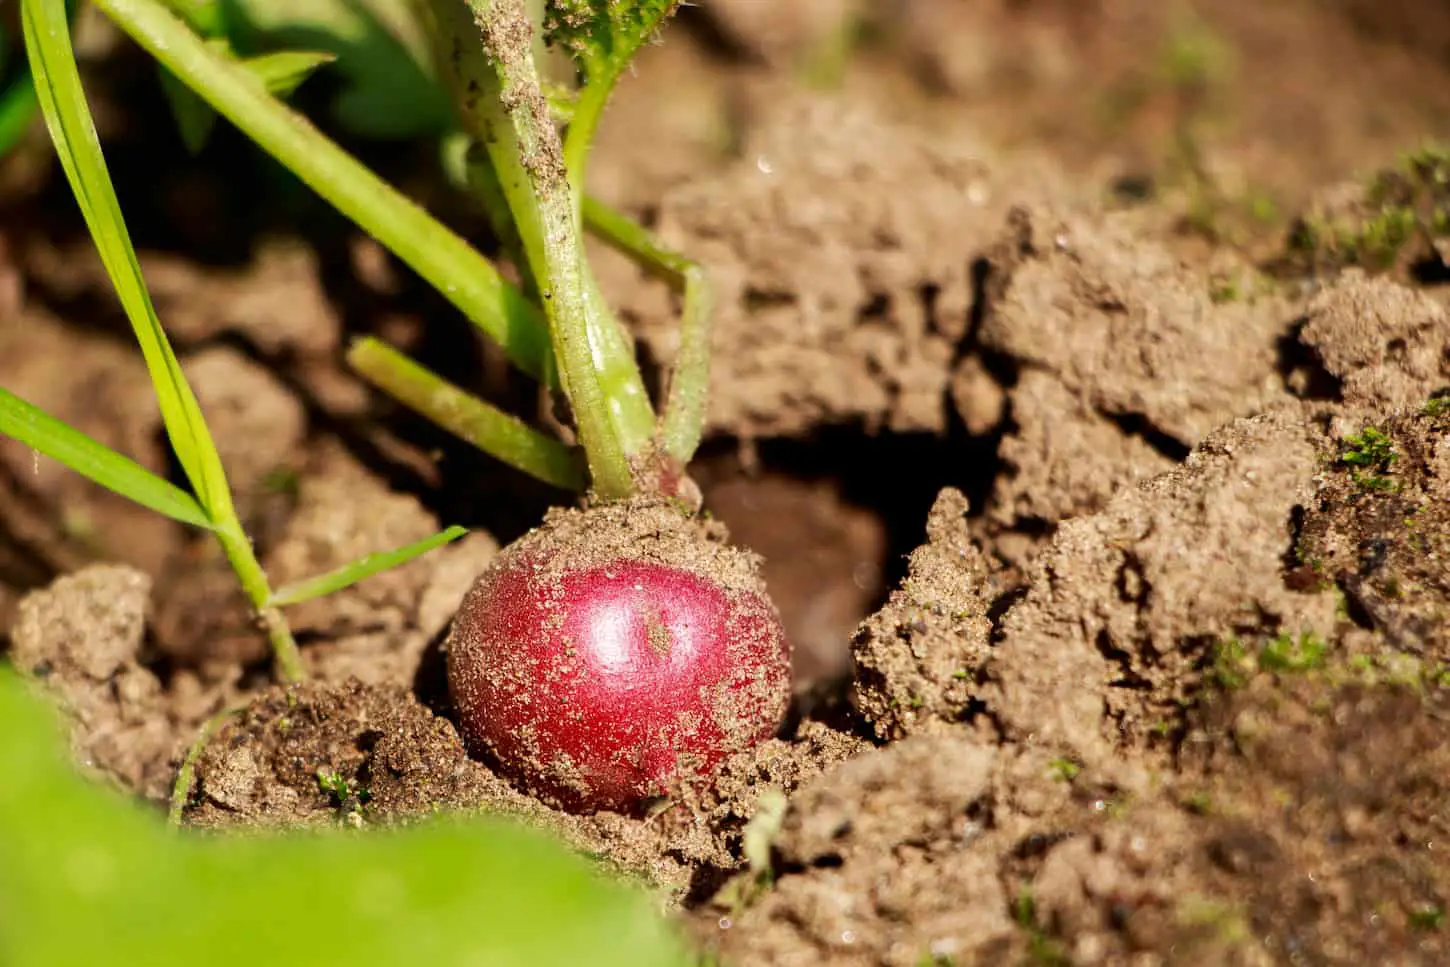 An image of a Ripe radish vegetable in the ground growing in the garden.